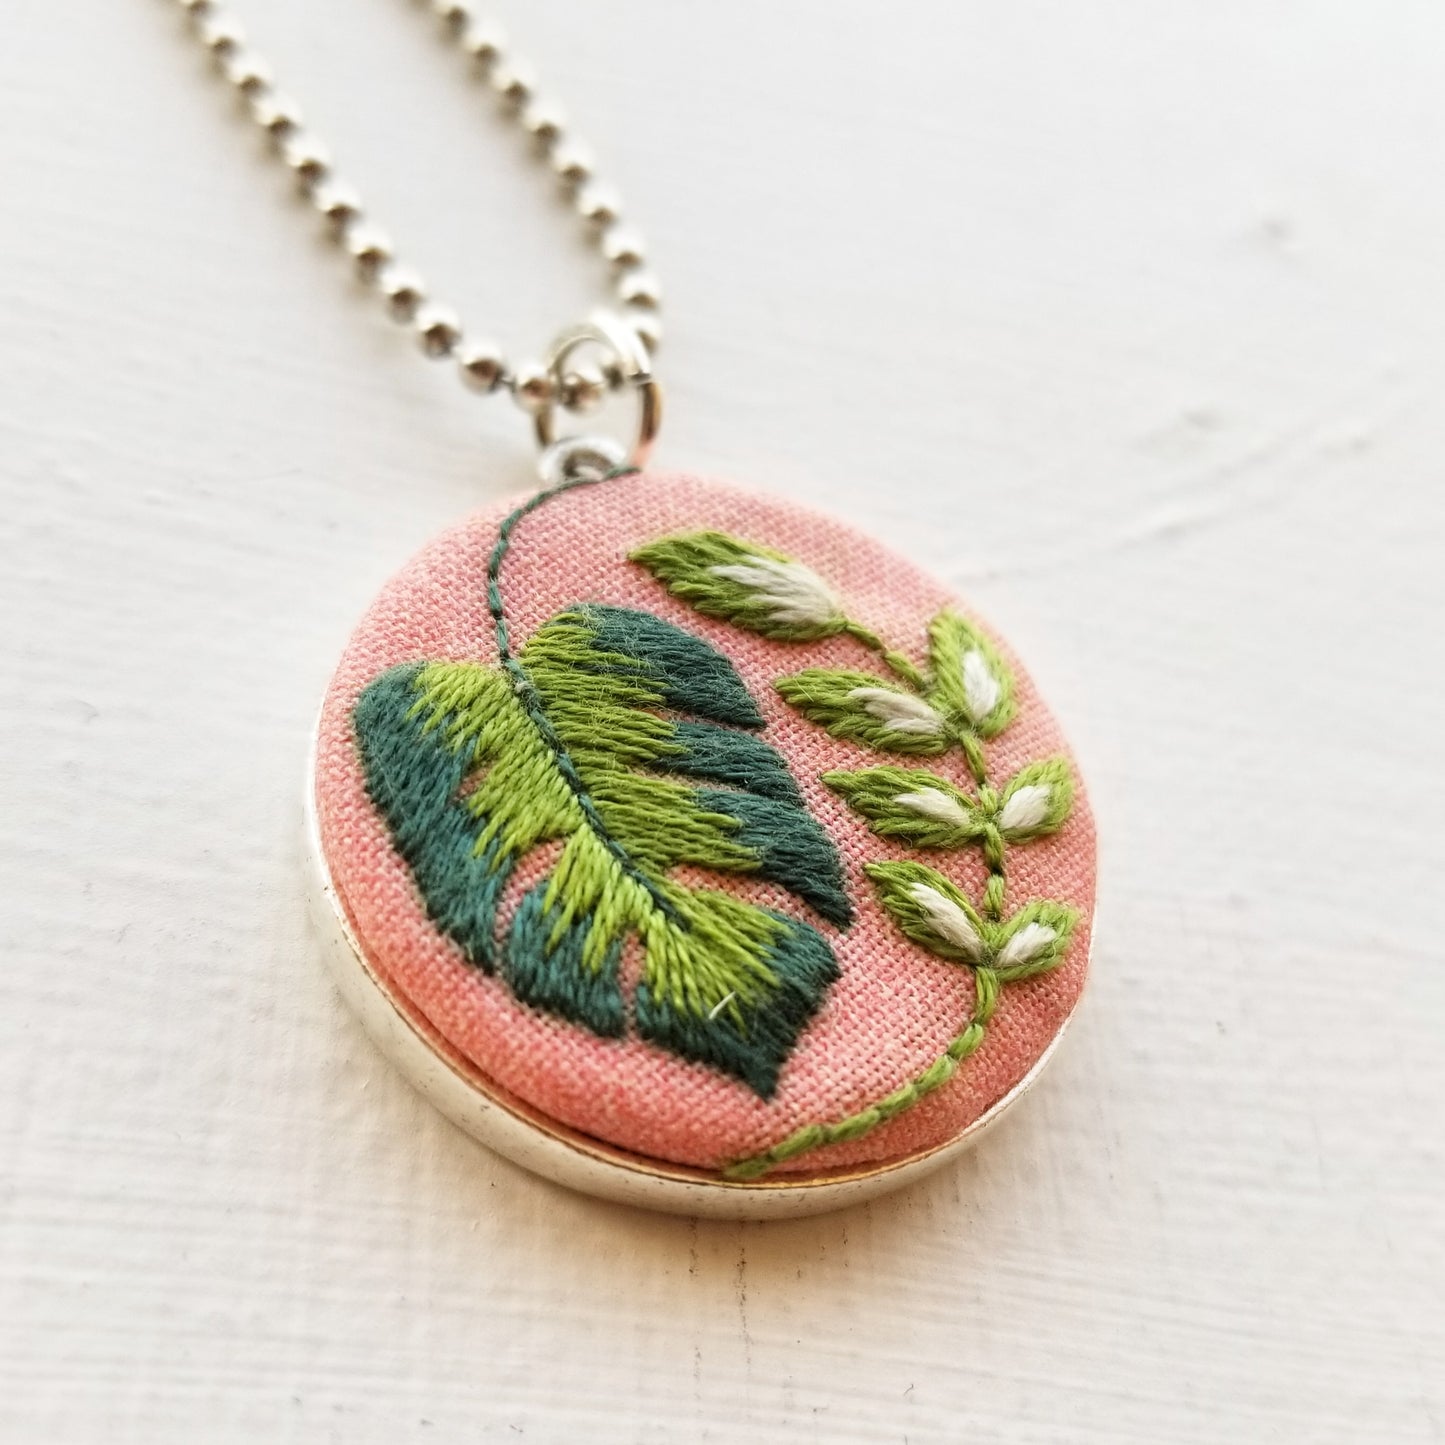 DIY Hand Embroidered Jewelry Kit: Tropical Plants